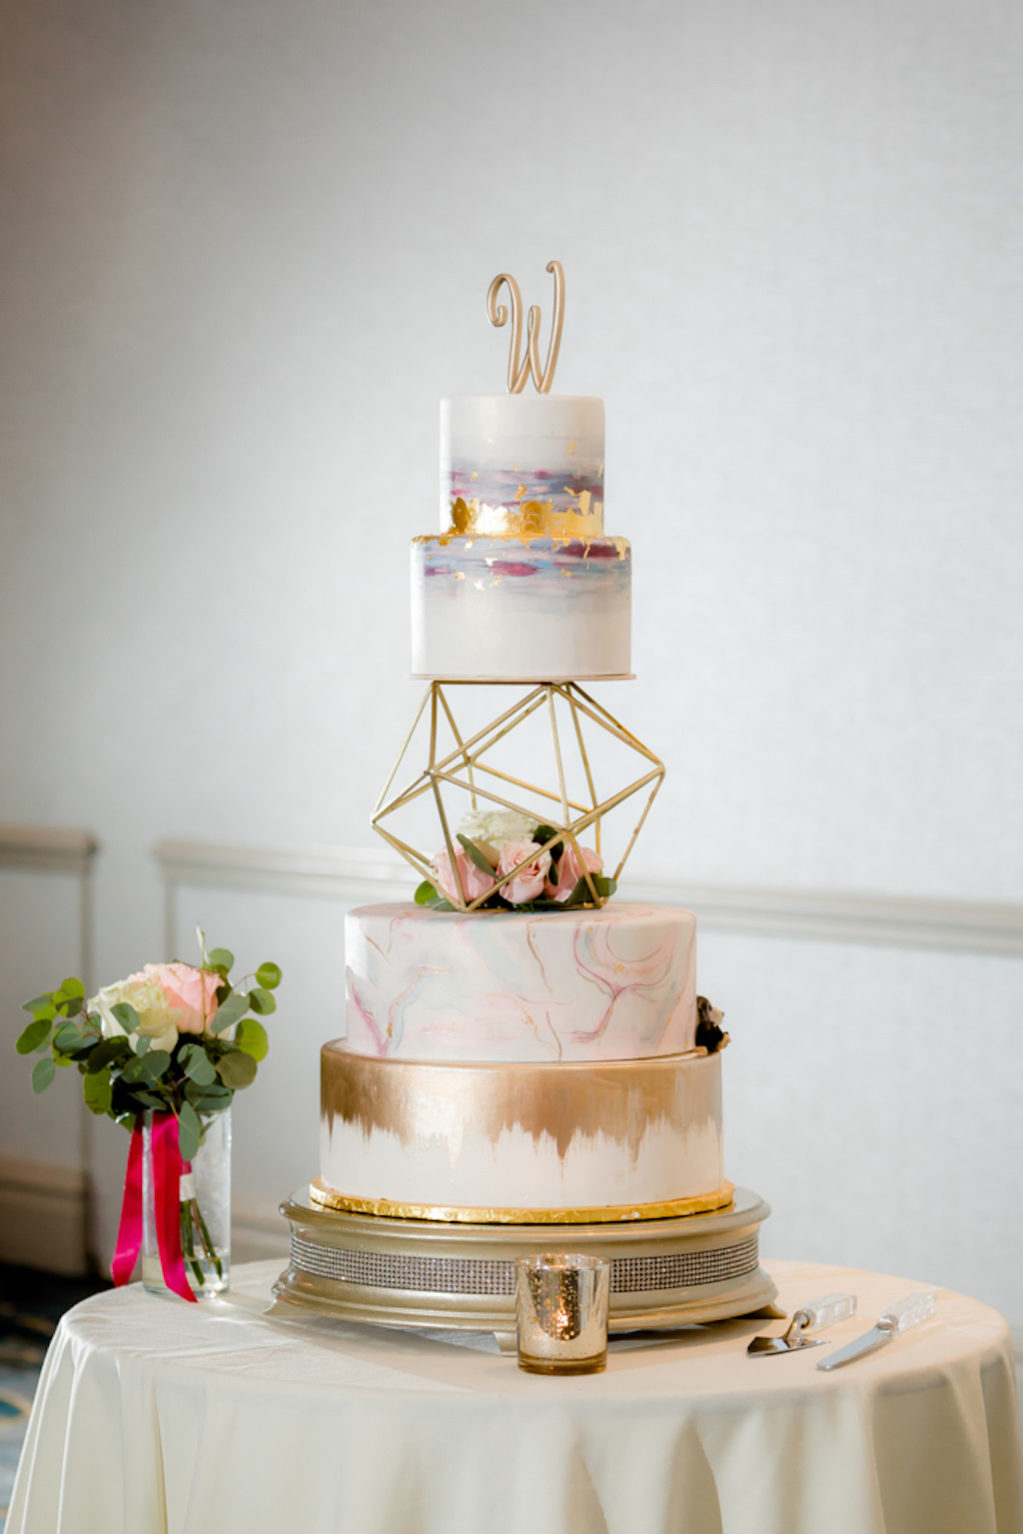 Five Tier White, Gold Painted, Pink Marble Wedding Cake with Gold Geometric Vase and Real Flowers Tier, Custom Cake Topper | Tampa Bay Wedding Cake Baker The Artistic Whisk